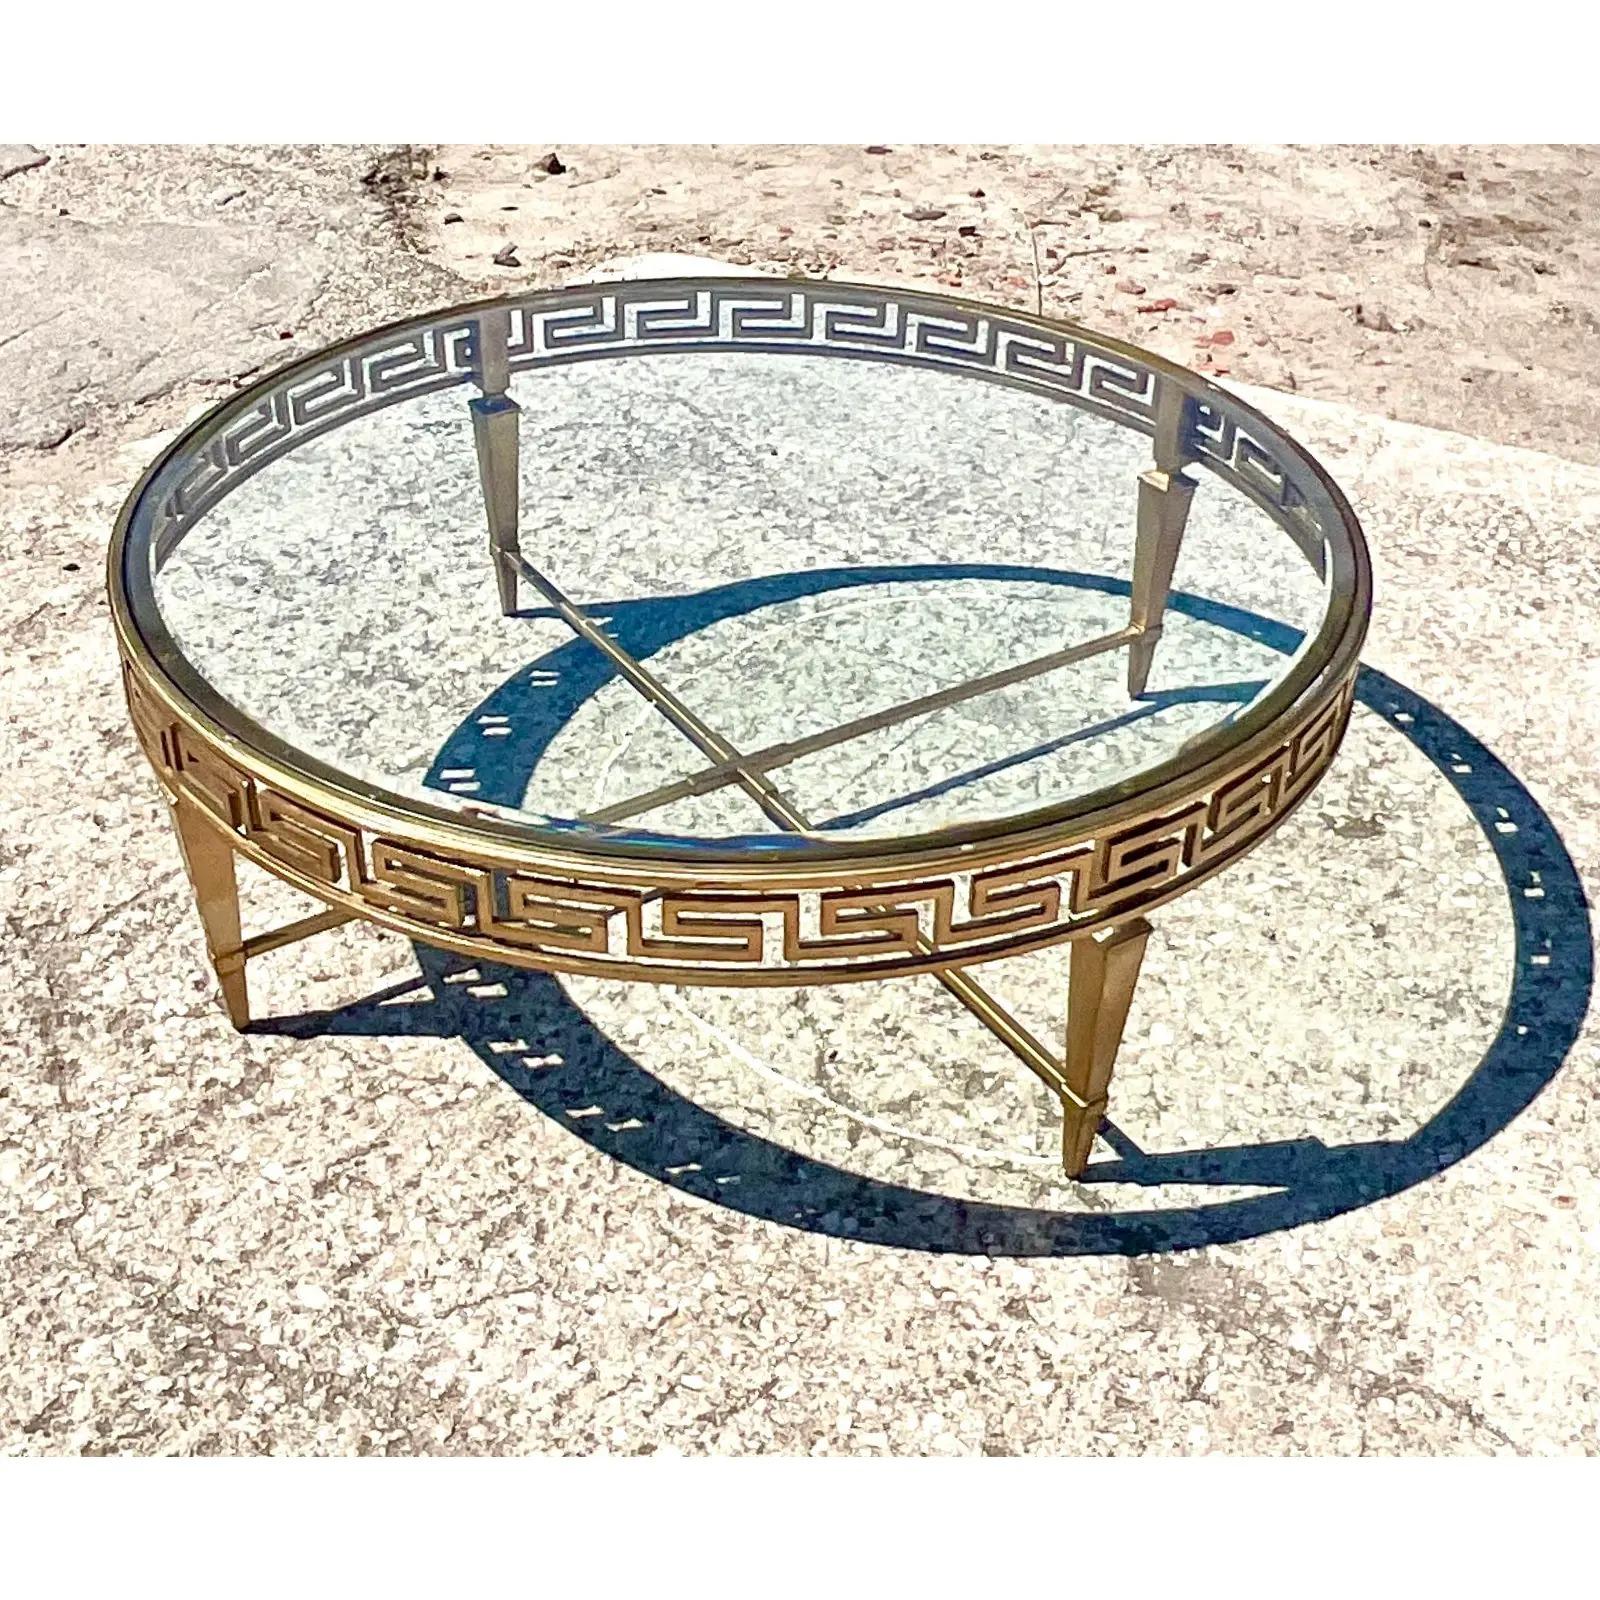 Stunning vintage Lexington Regency coffee table. Beautiful Greek Key design on a round gilt frame. A chic warm silver fining. Beveled glass inset. Acquired from a Palm Beach estate.